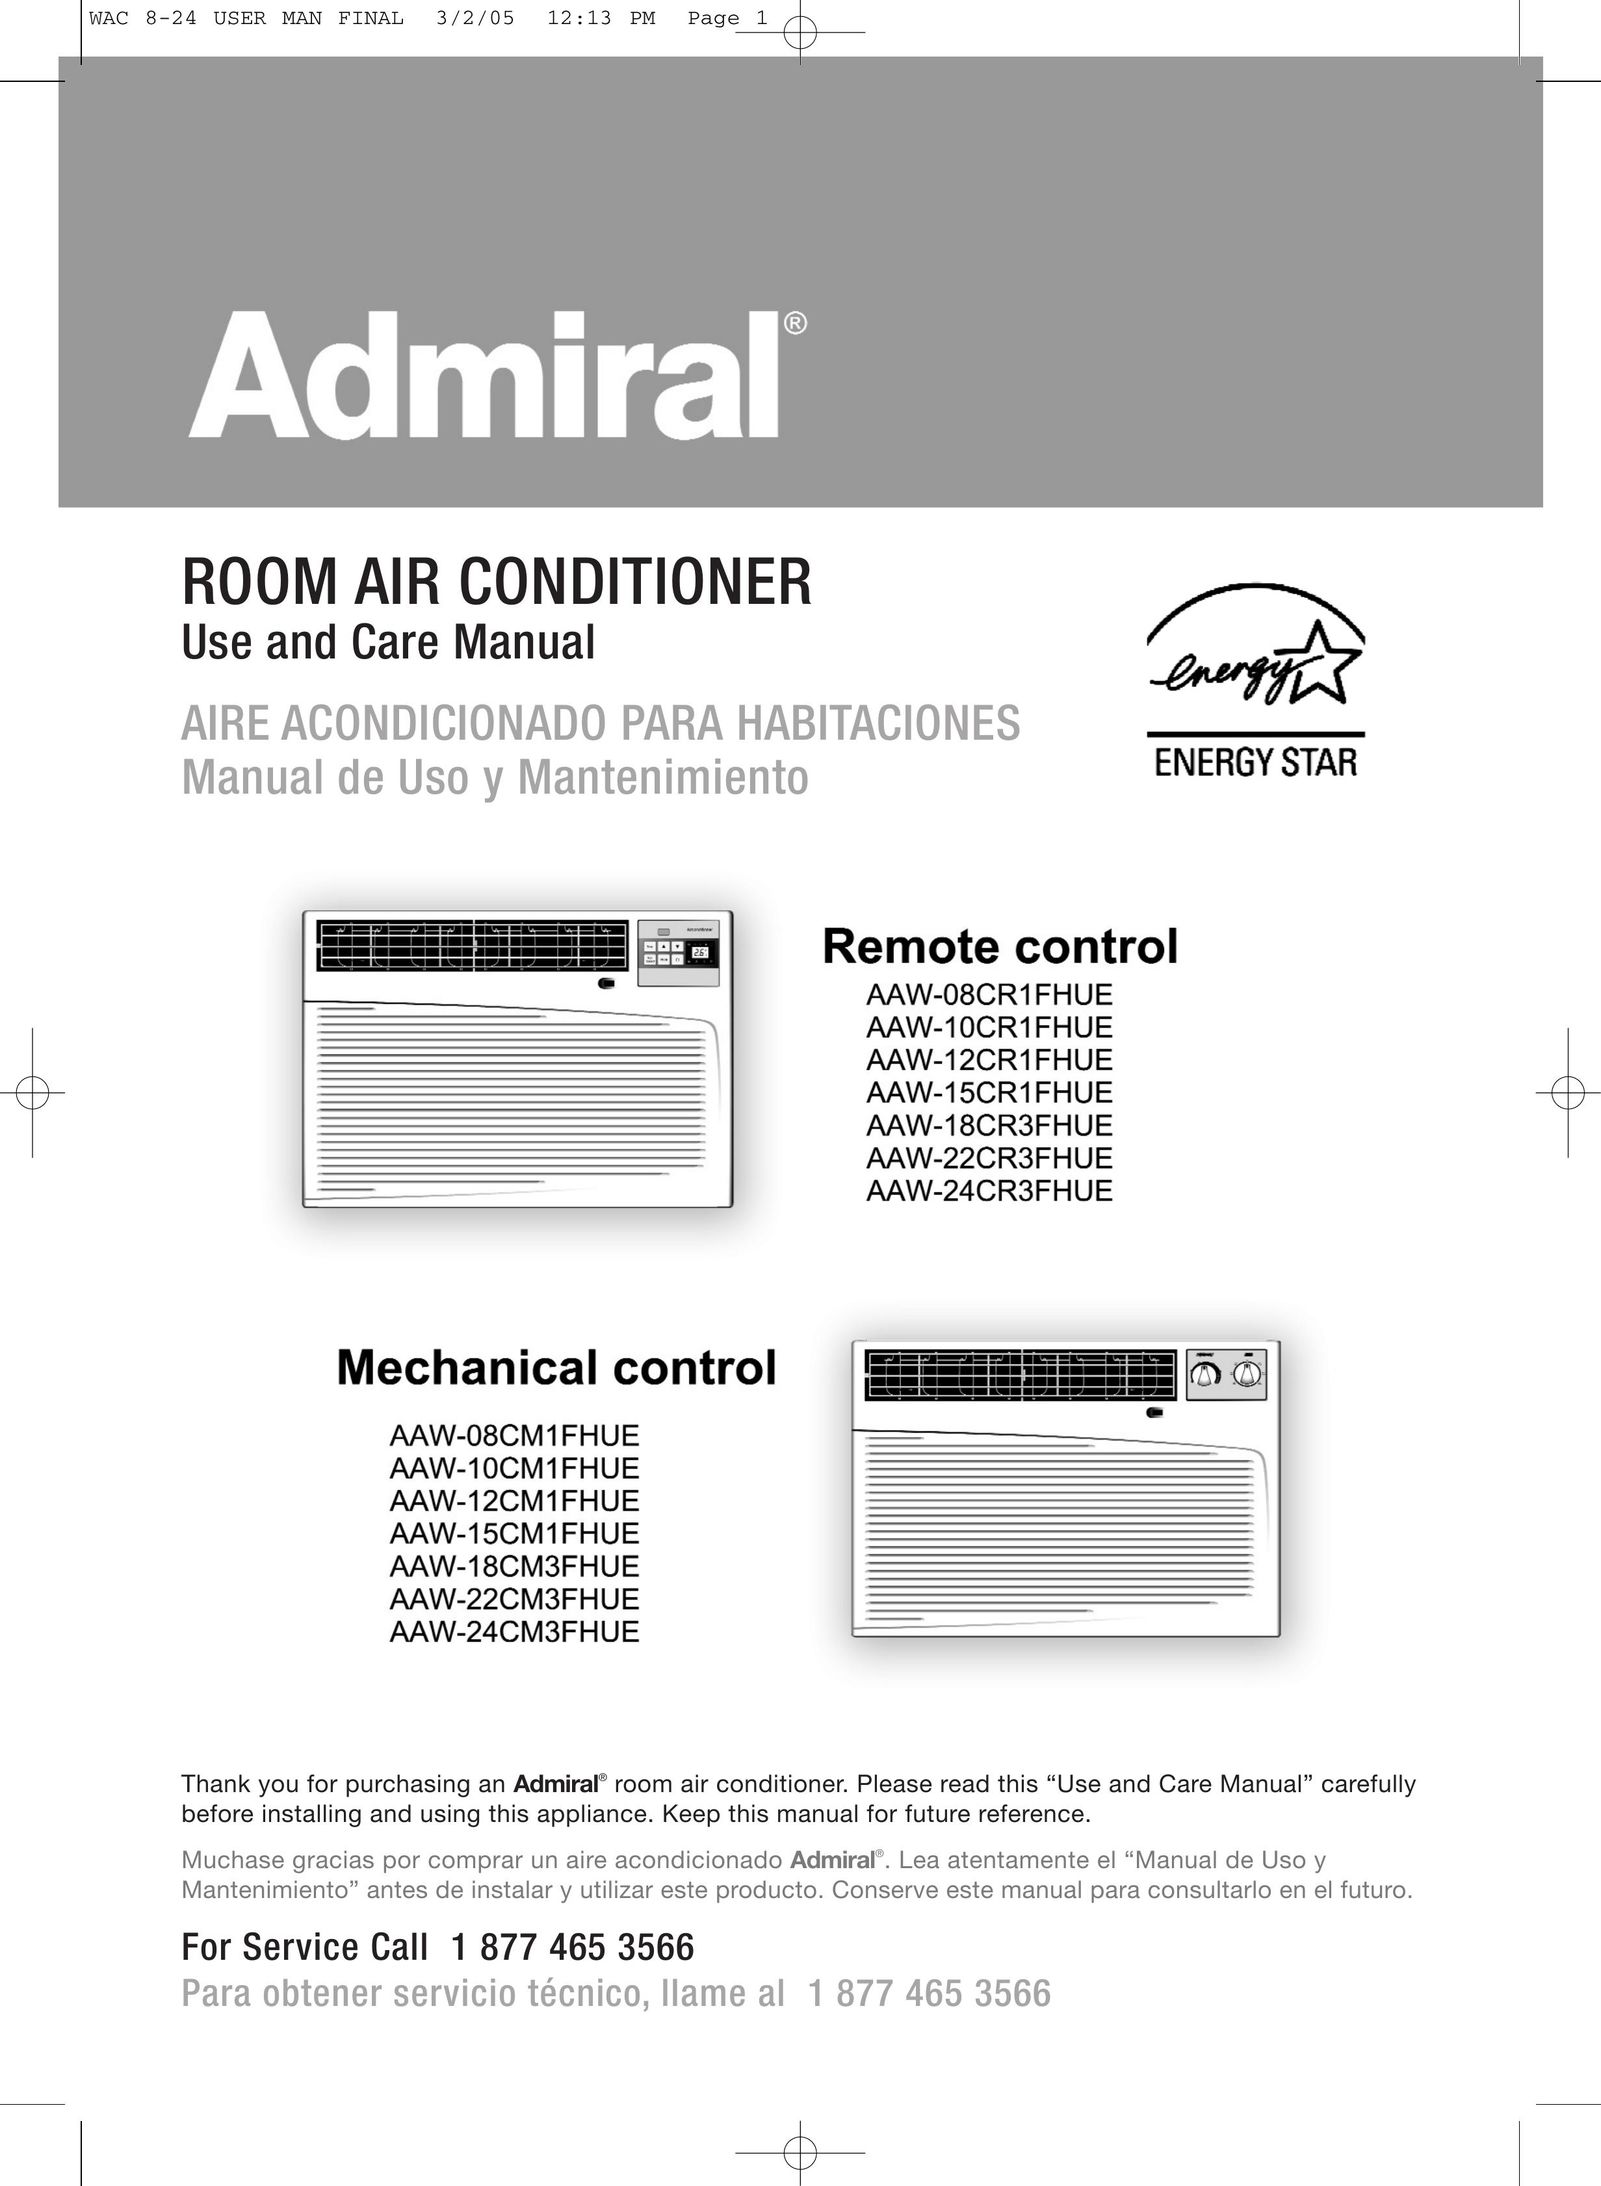 Admiral AAW-15CM1FHUE Air Conditioner User Manual (Page 1)